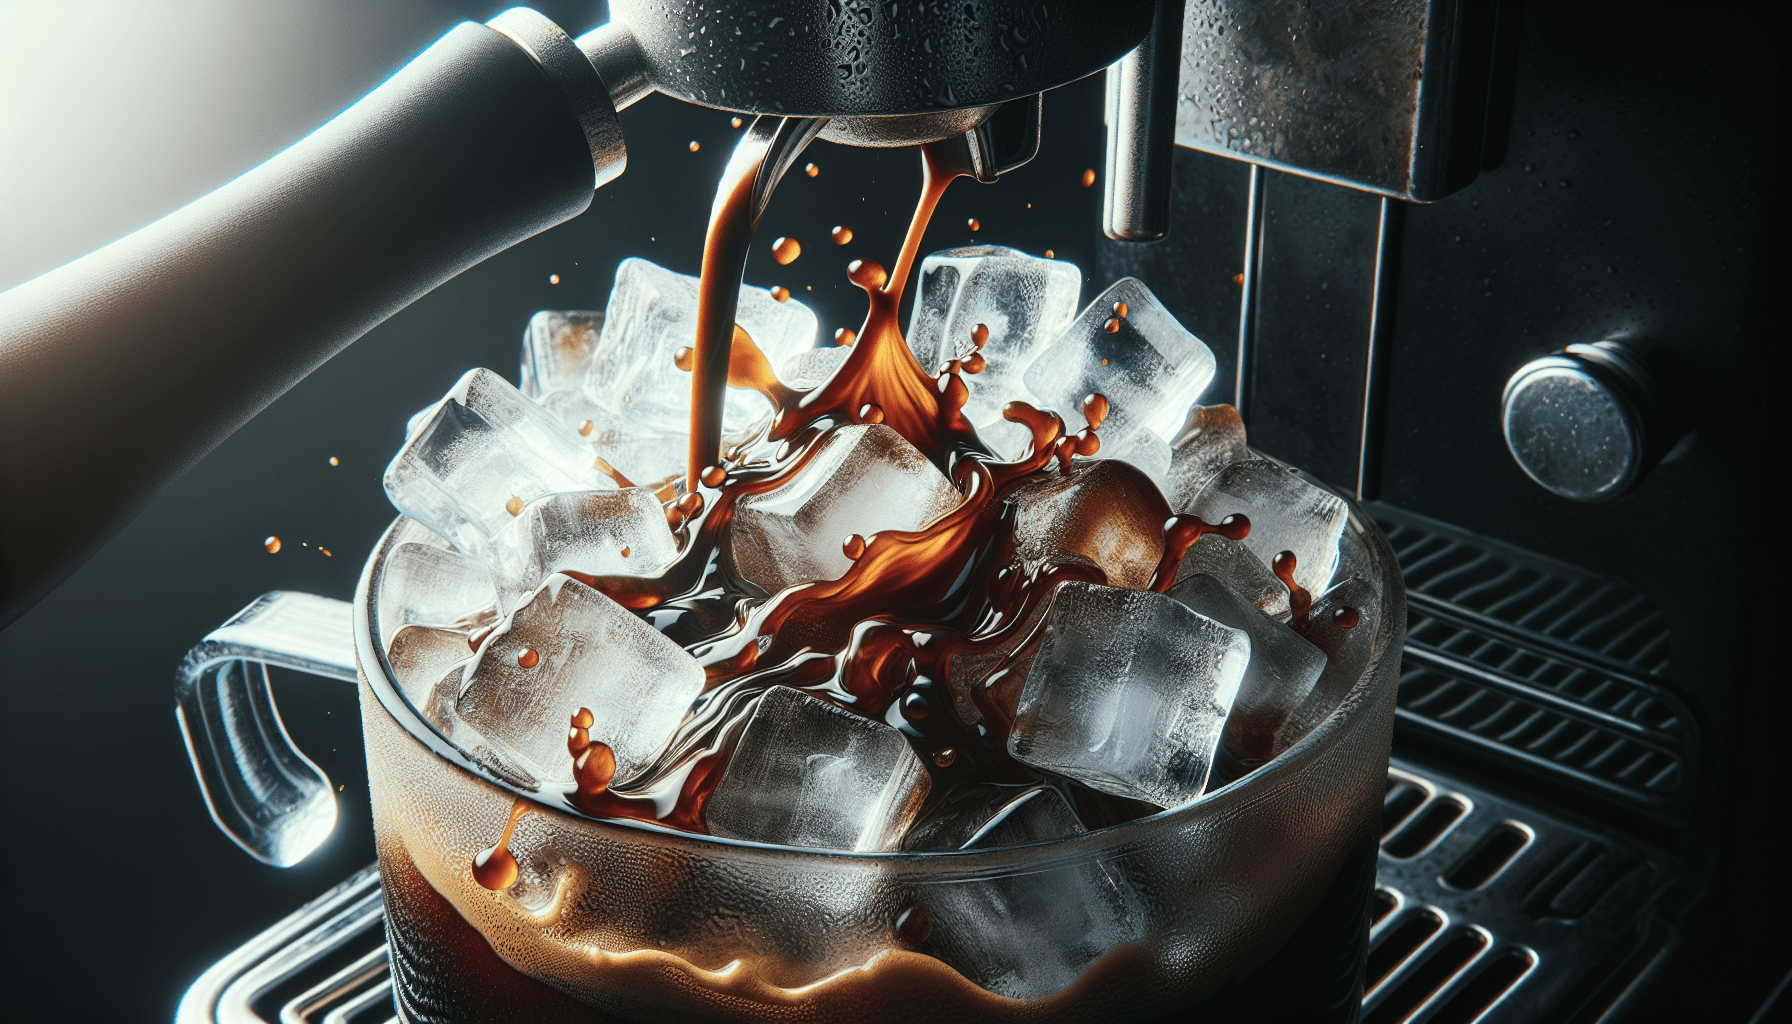 How To Make Iced Coffee With Espresso?